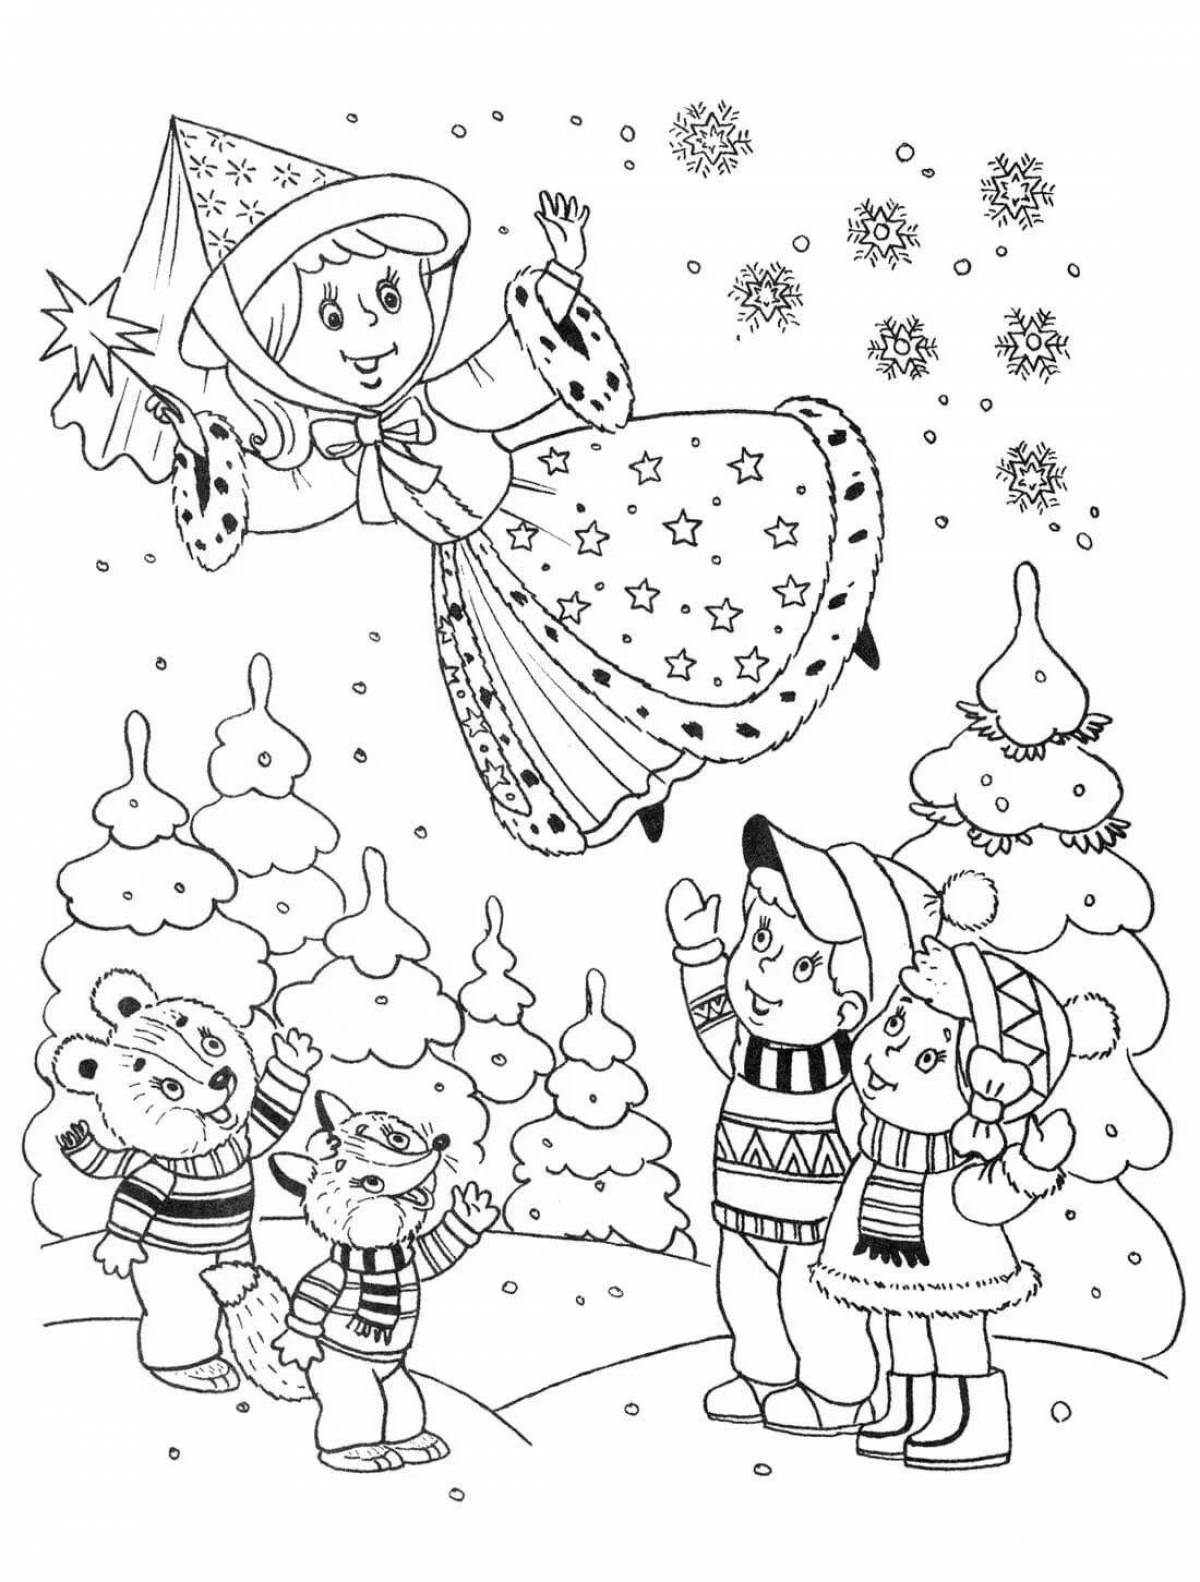 Wonderful 5 year old winter coloring book